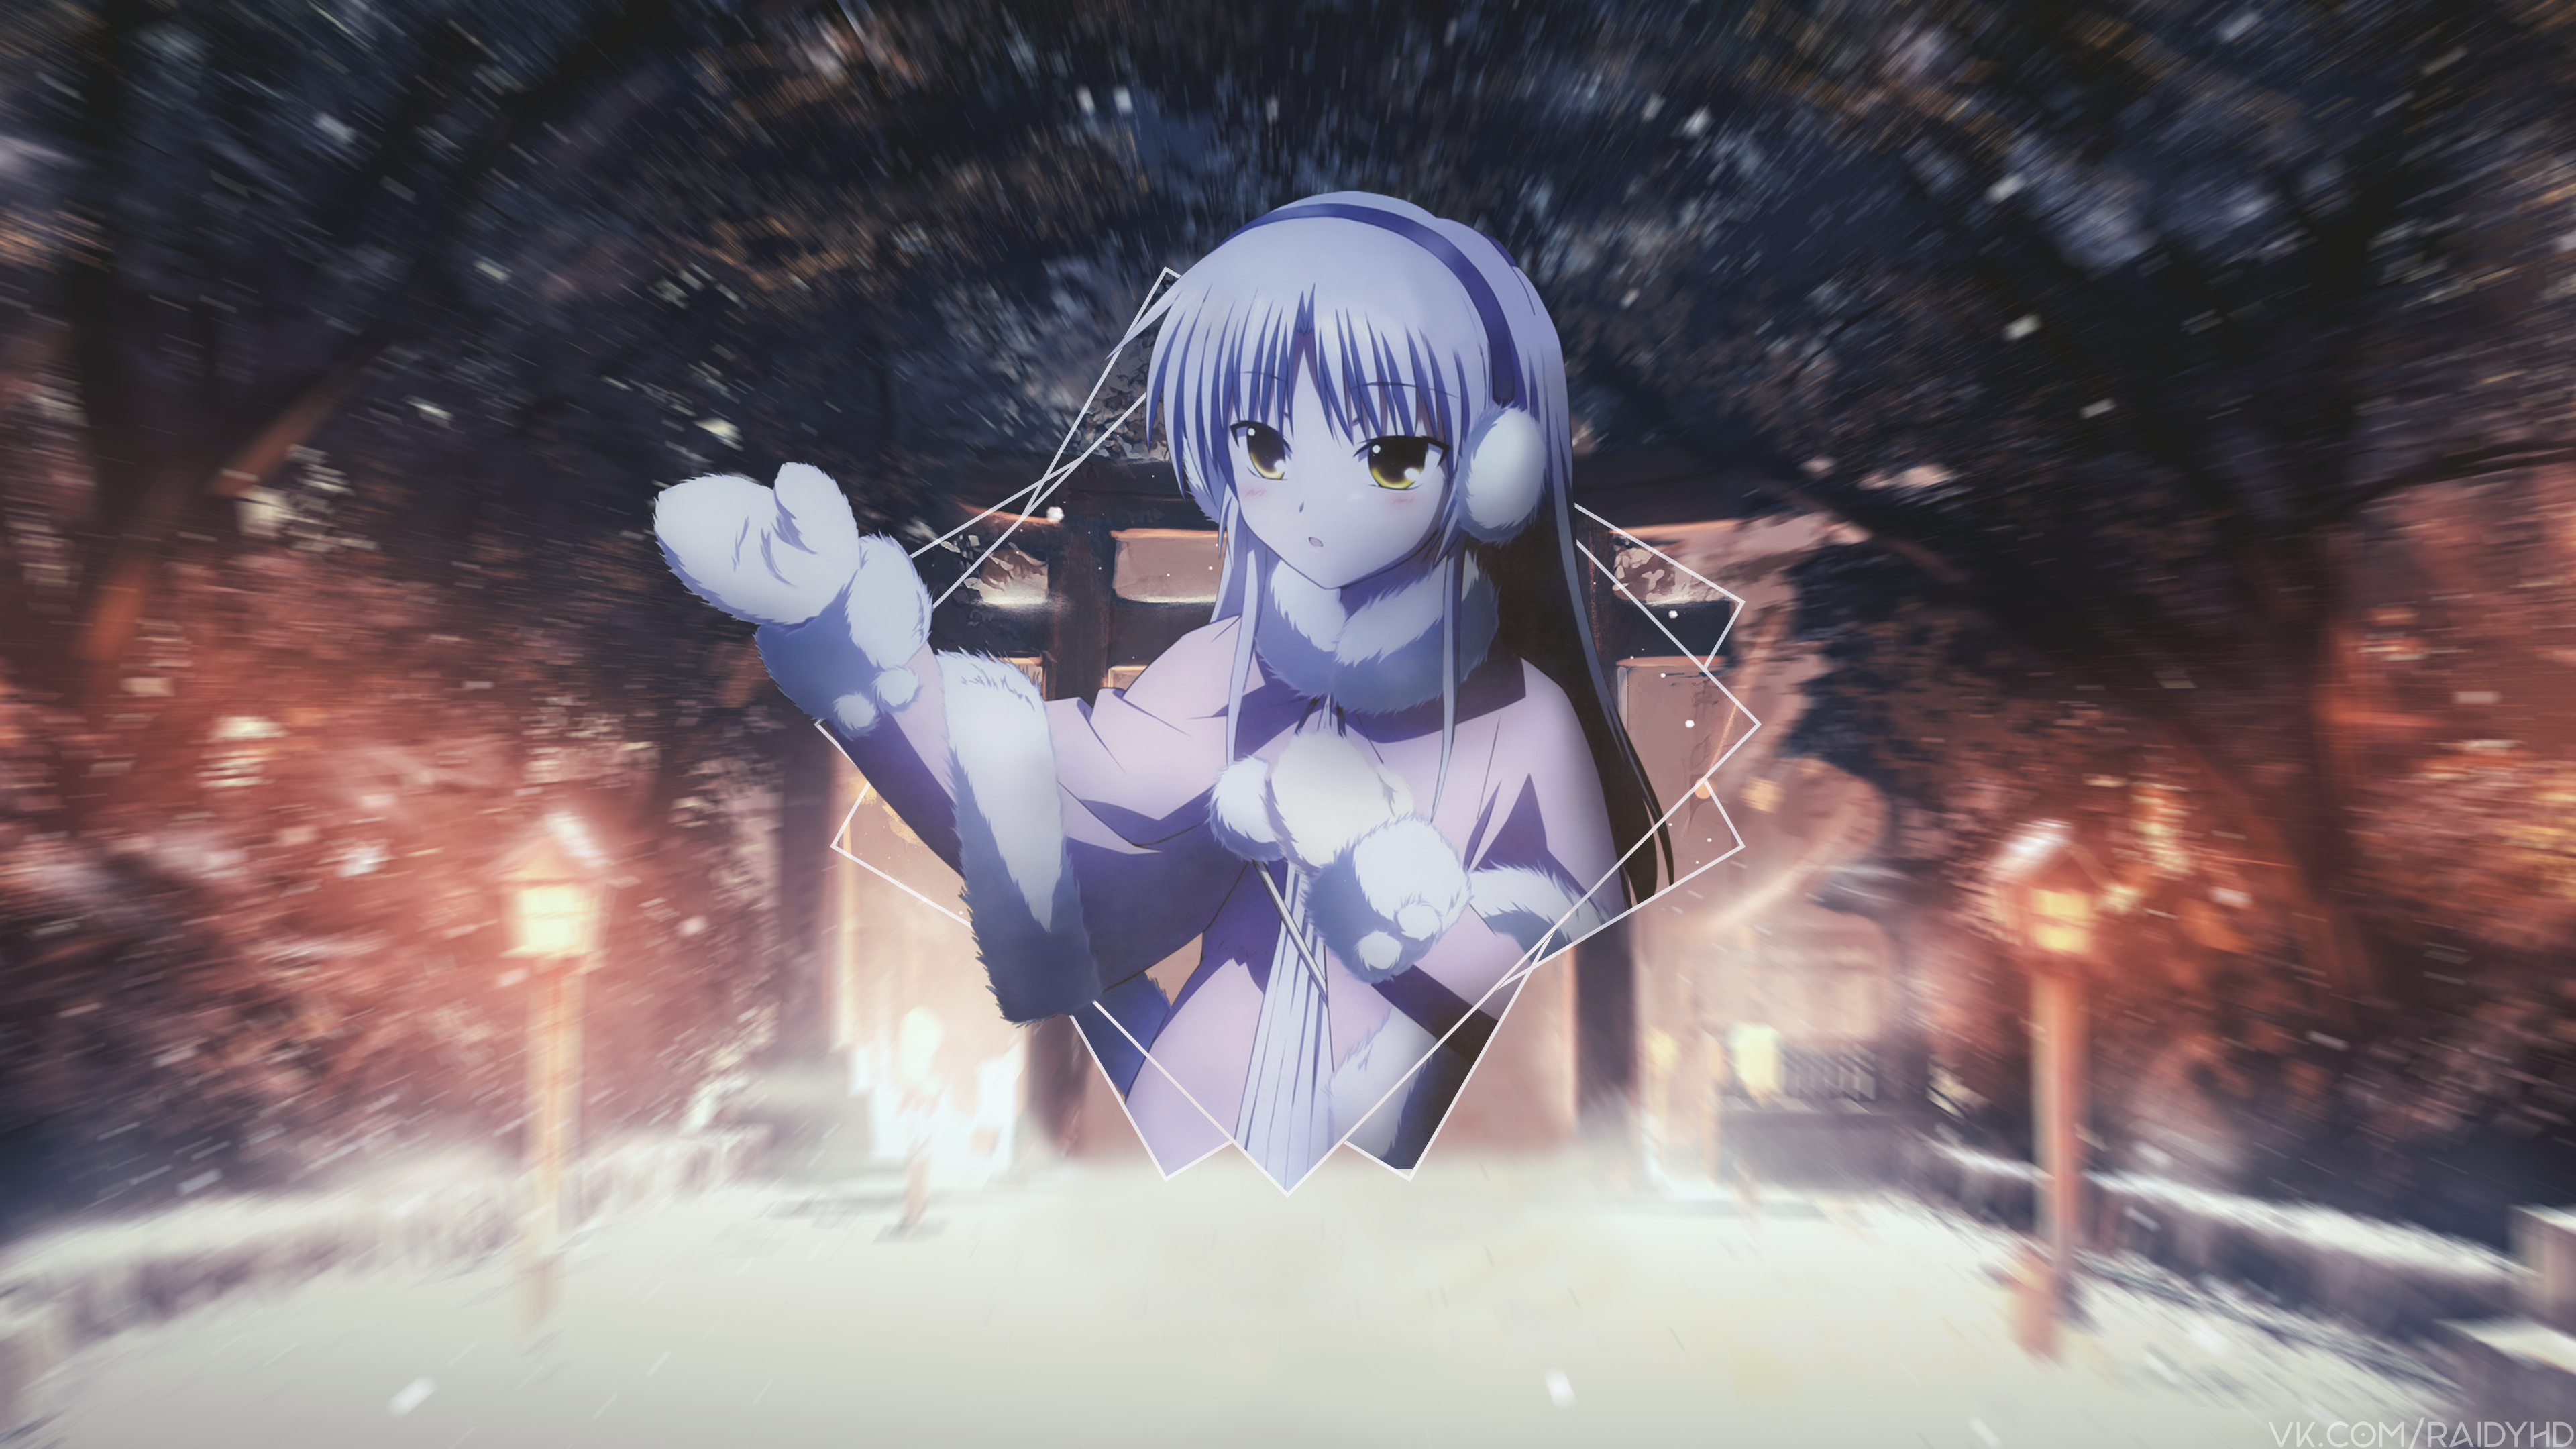 Anime Anime Girls Picture In Picture Moescape Tachibana Kanade Angel Beats 3840x2160